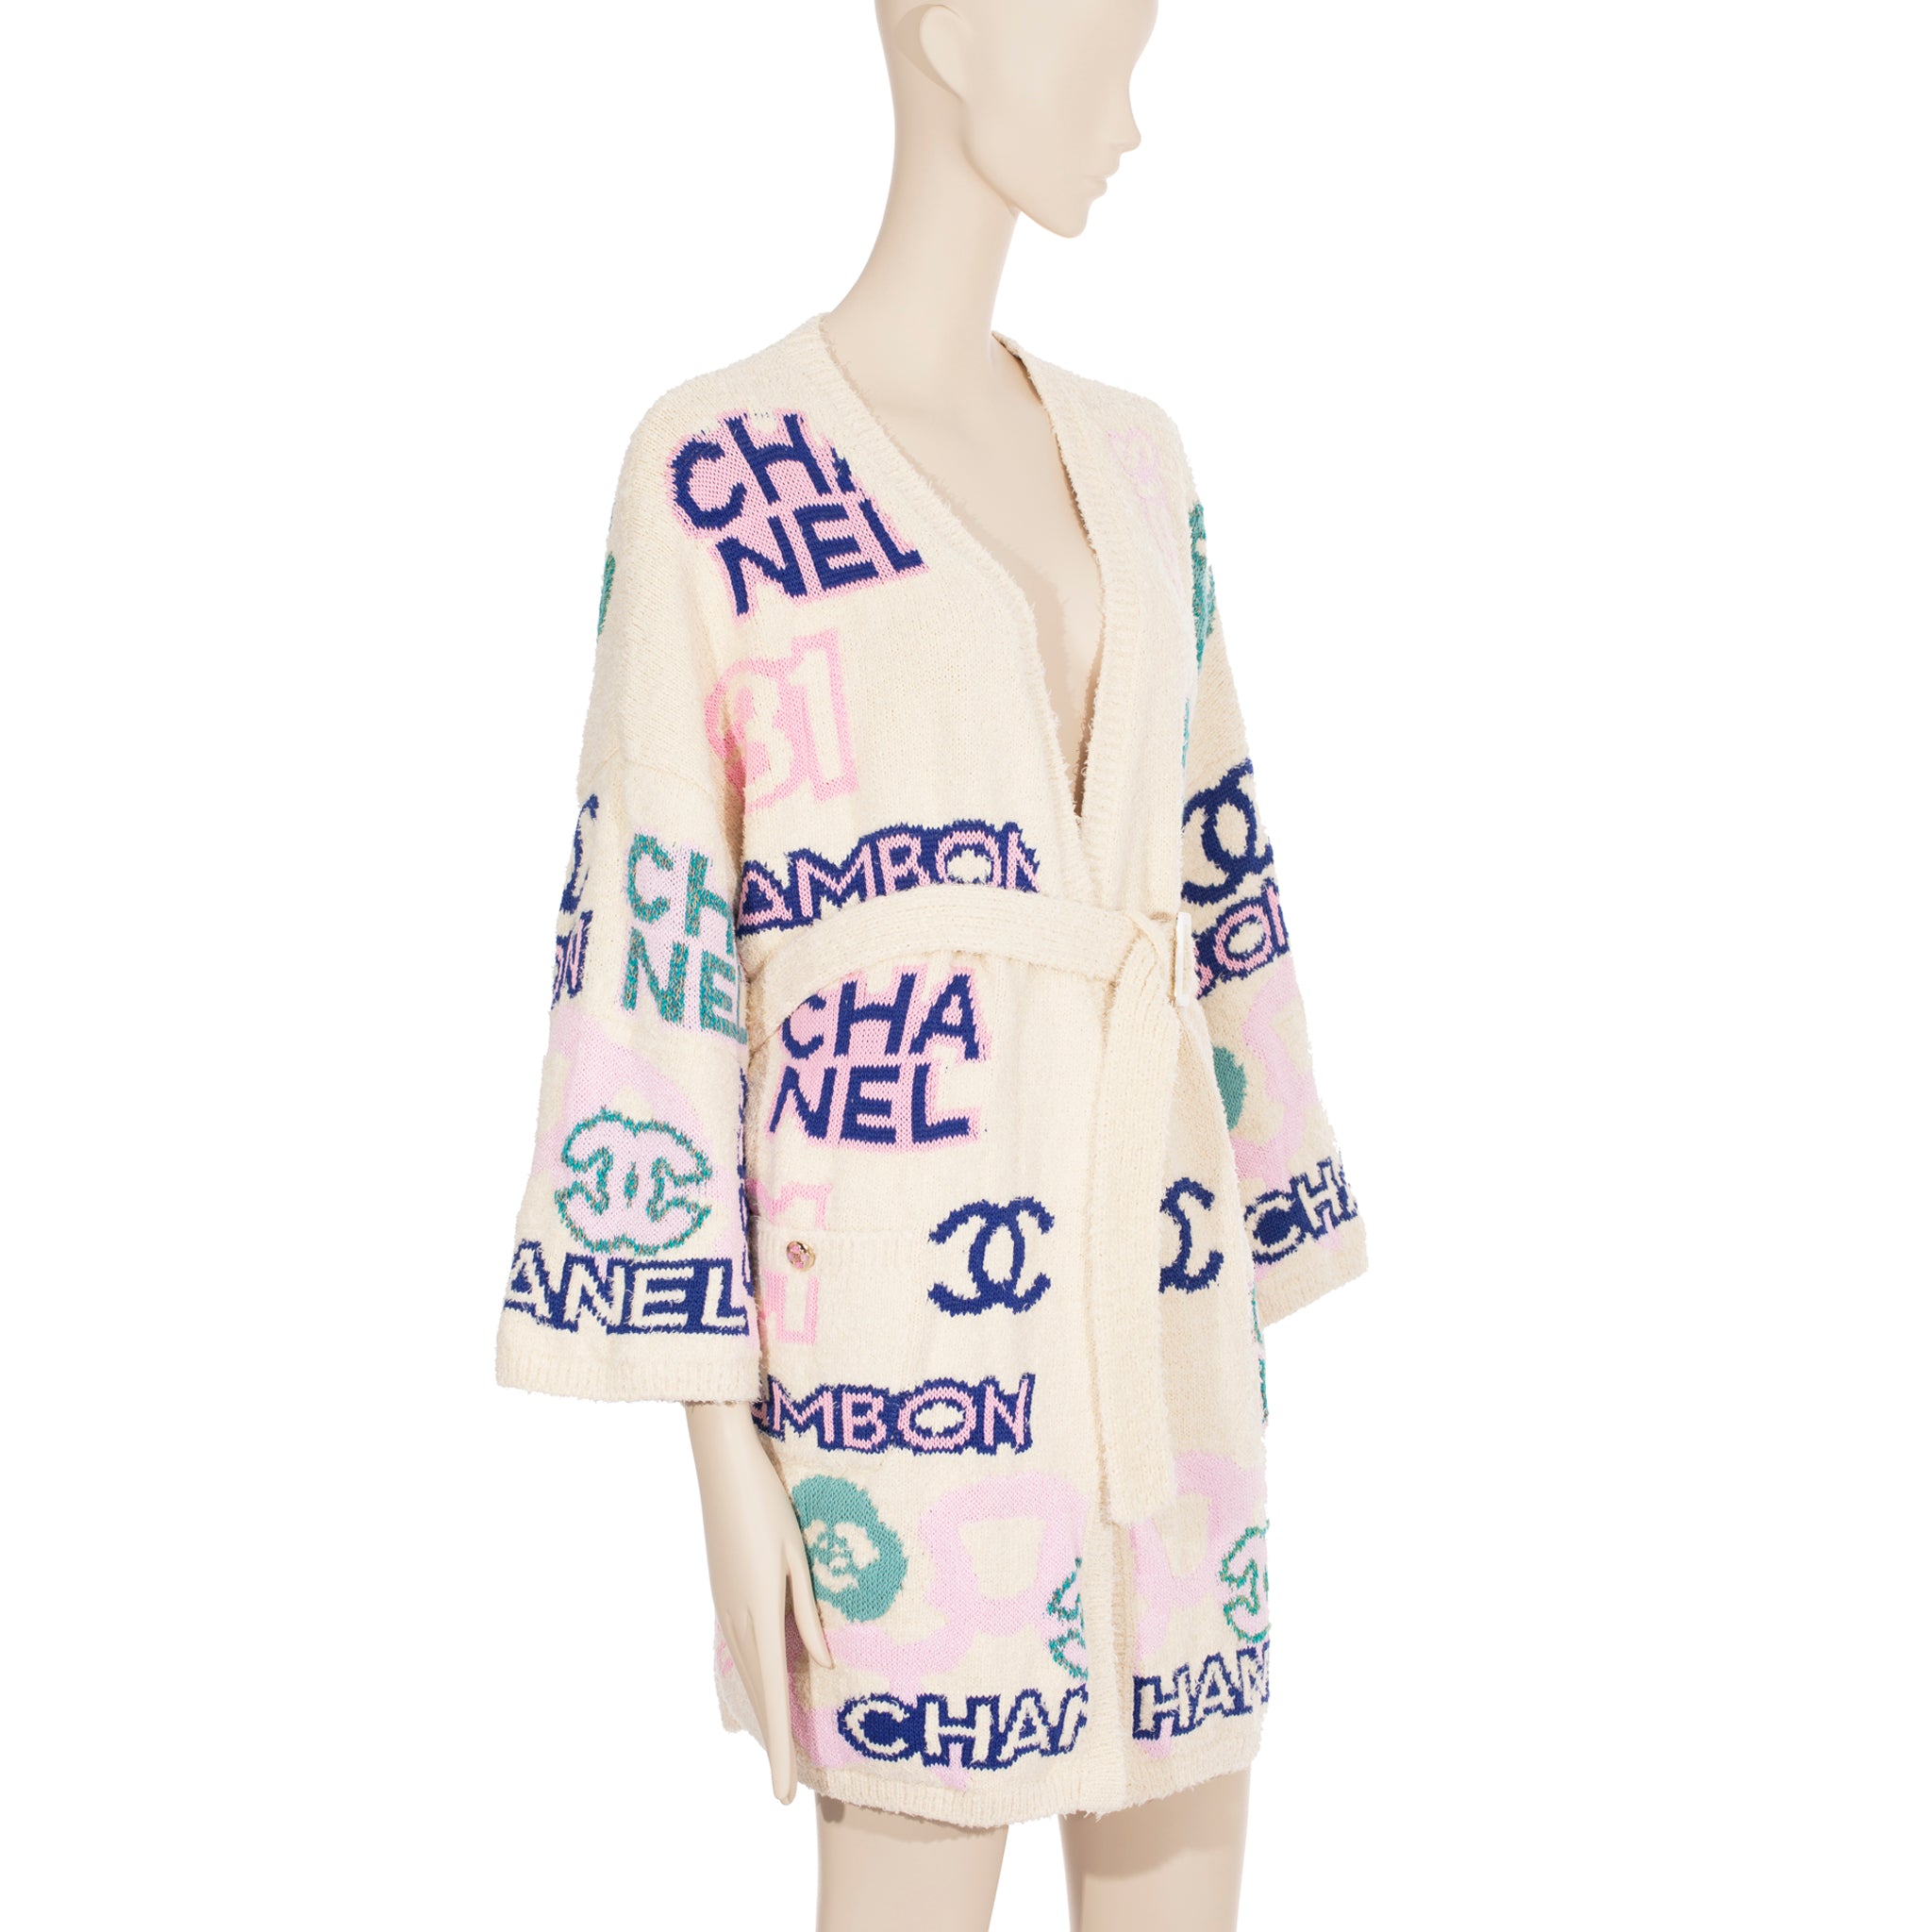 Chanel Cotton Cardigan With Colourful Details 38 Fr